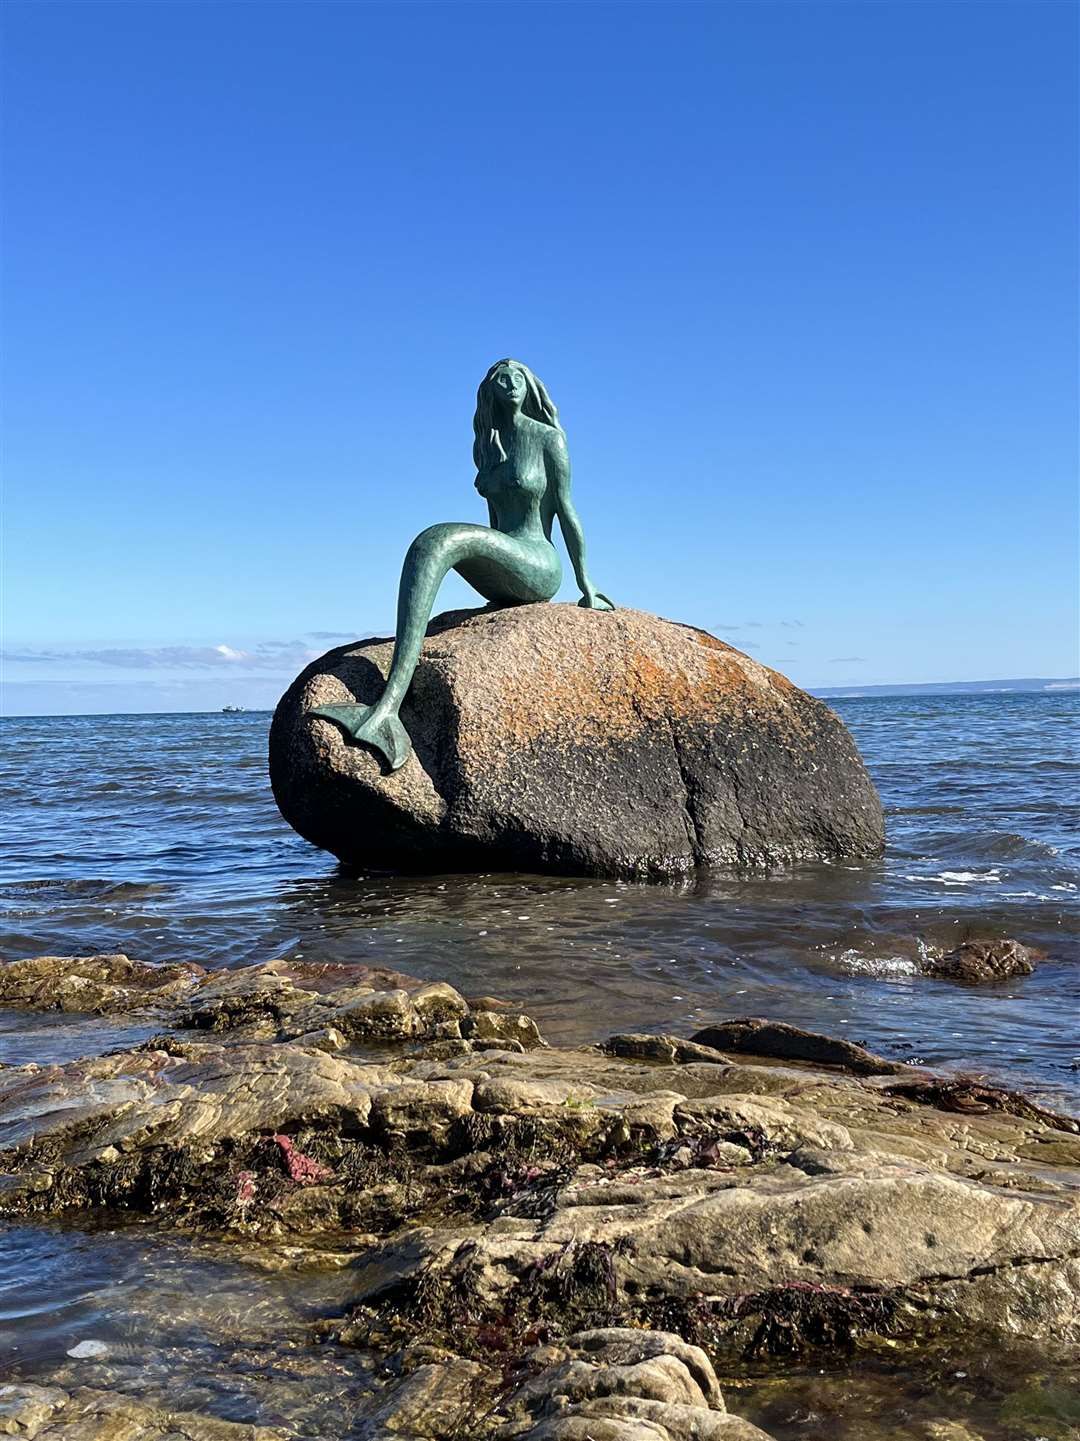 Plan your own route or find one to see the Mermaid Of Balintore. Picture: Carenza Murray